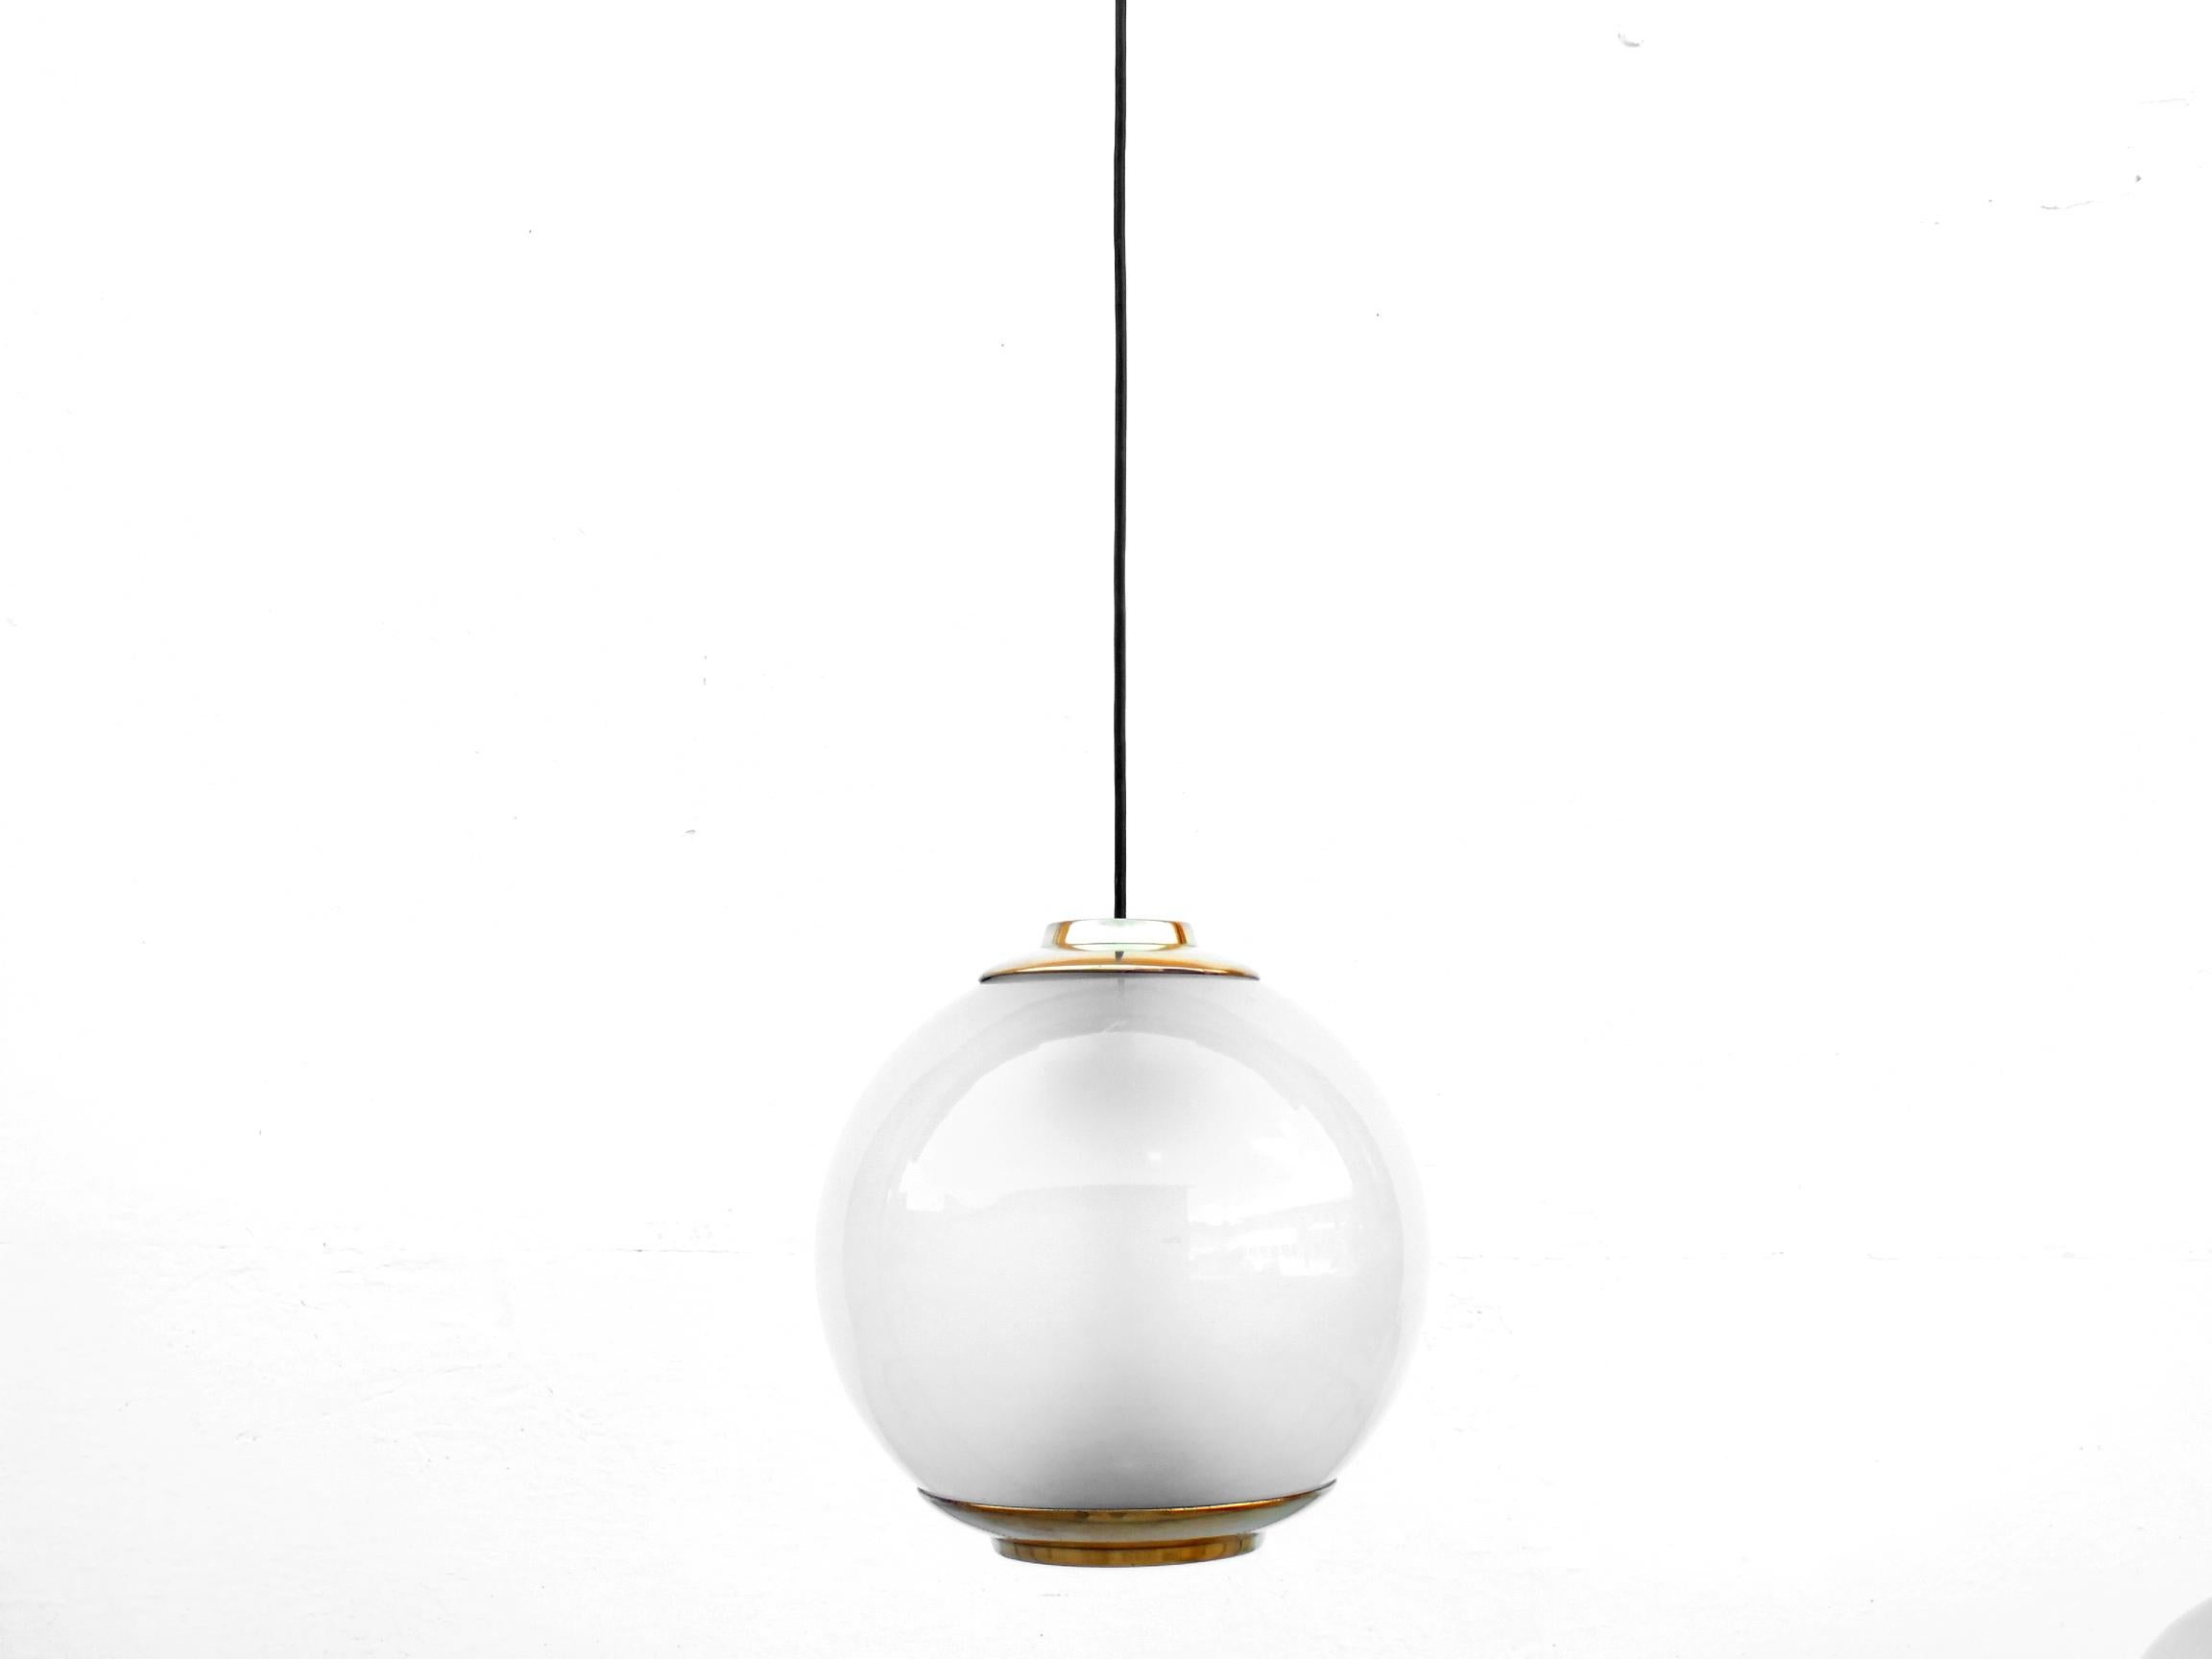 Luigi Caccia Dominioni design one rare big ball ceiling lamps Ls2 by Azucena Italy production in years ’52 The piece features a spherical milk glass shade as well as a mounting in polished brass and ceiling black cable. The sell is for one ceiling